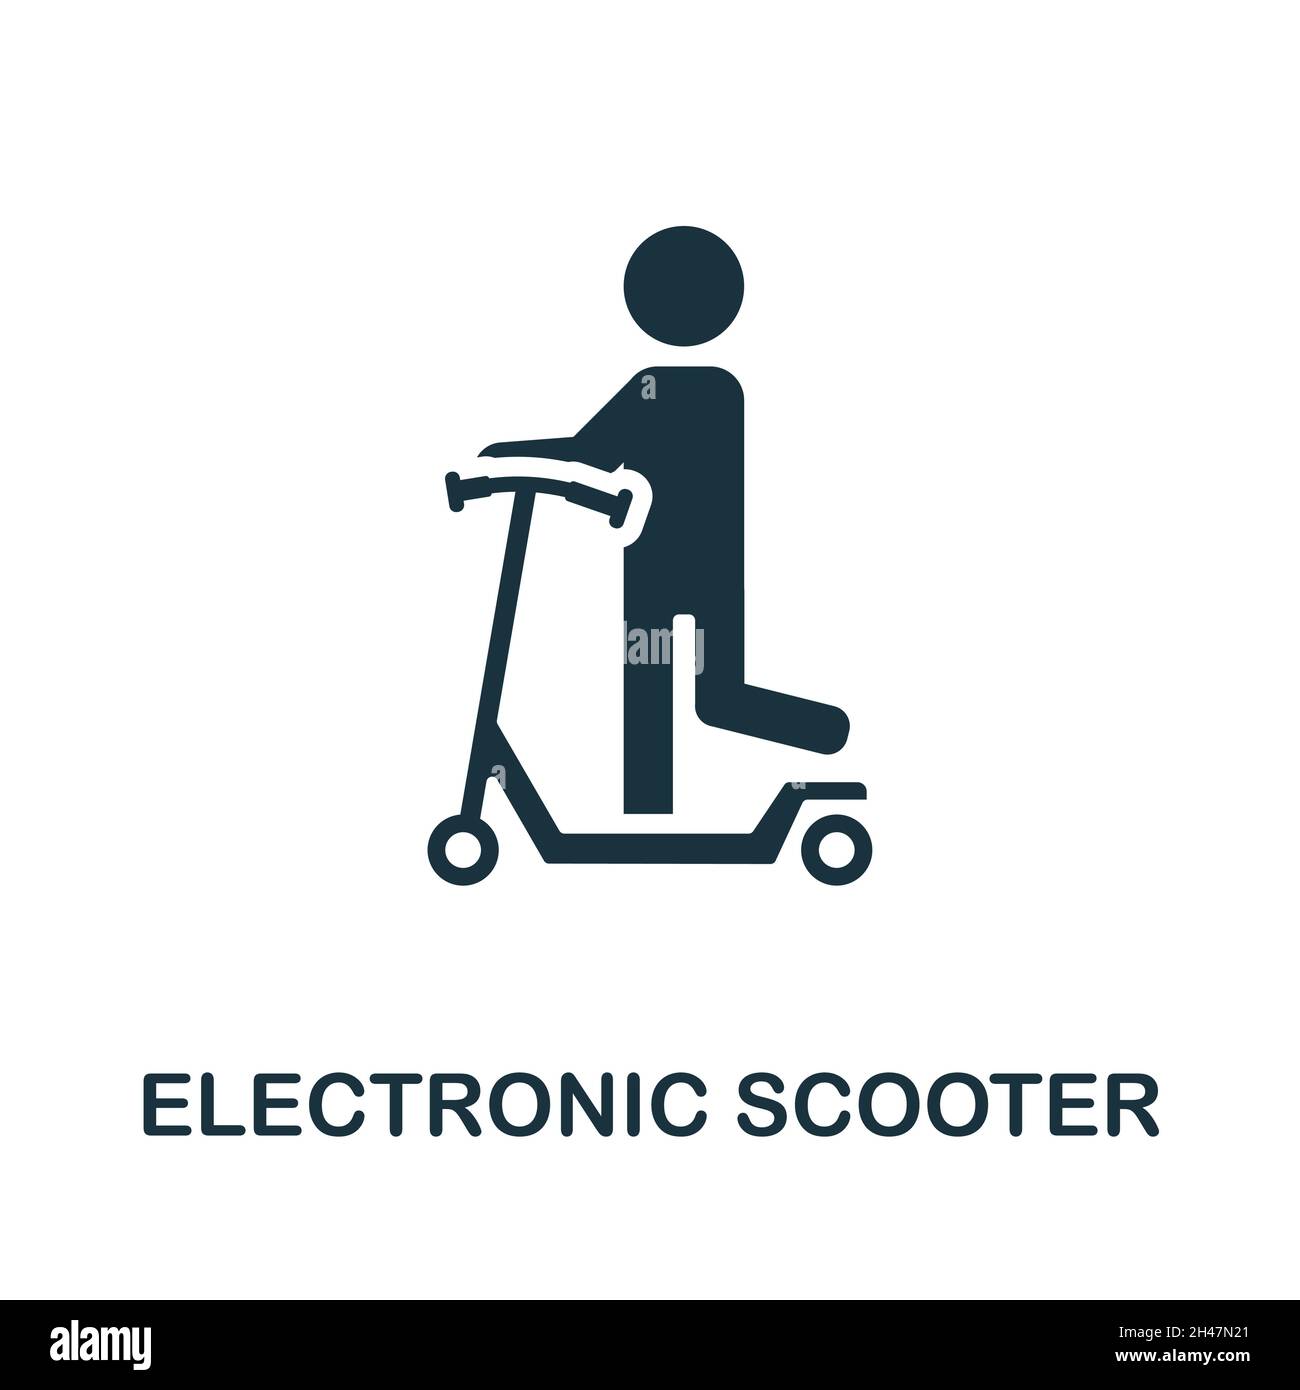 Electronic Scooter icon. Monochrome sign from big city life collection. Creative Electronic Scooter icon illustration for web design, infographics and Stock Vector